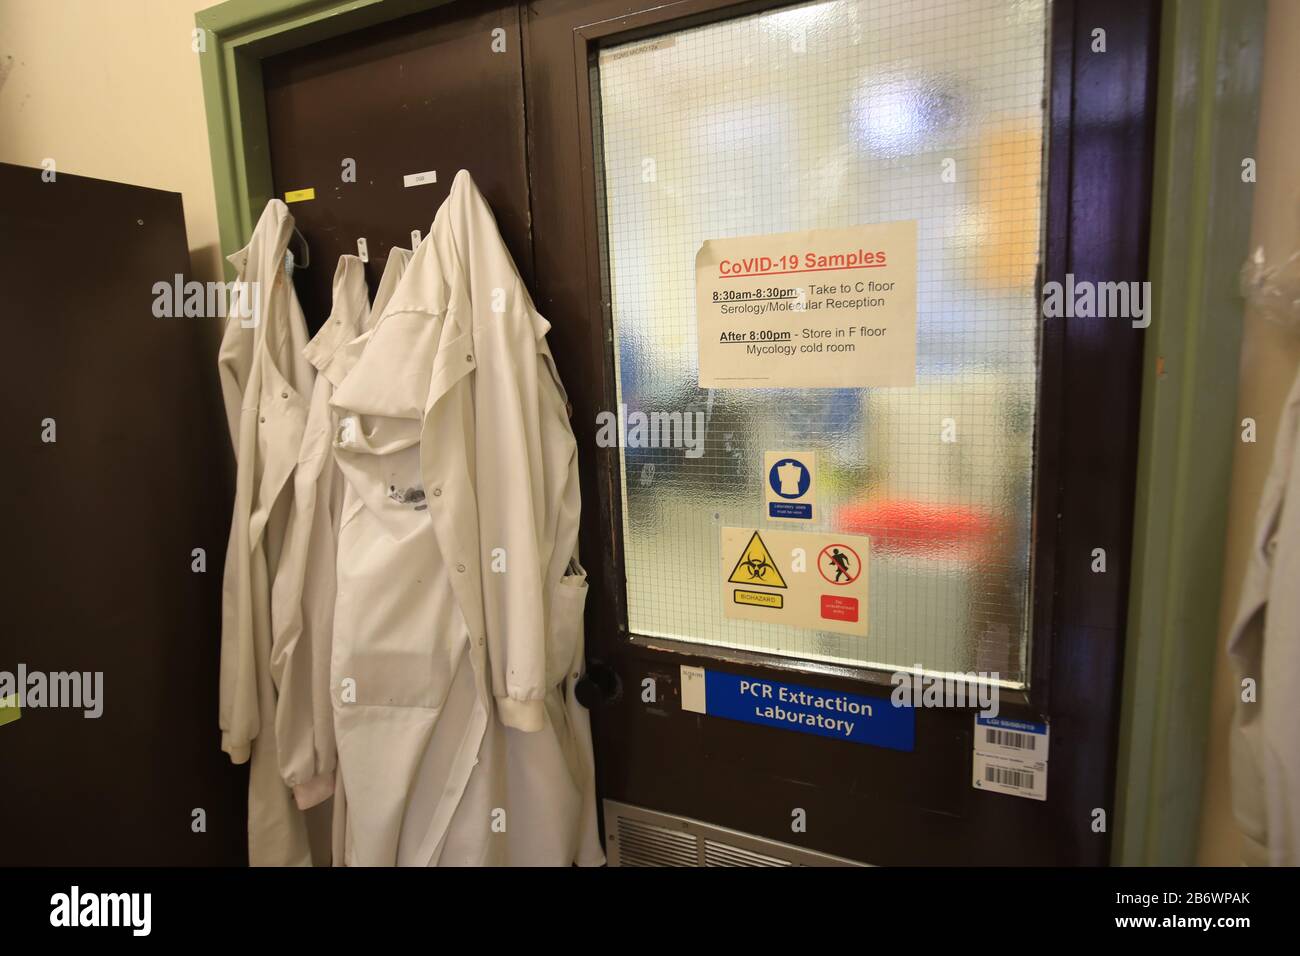 The entrance to the pathology laboratories, which will receive coronavirus samples for testing, at the Old Medical School, Leeds General Infirmary to show how yesterday's budget is supporting those affected by COVID-19. Stock Photo